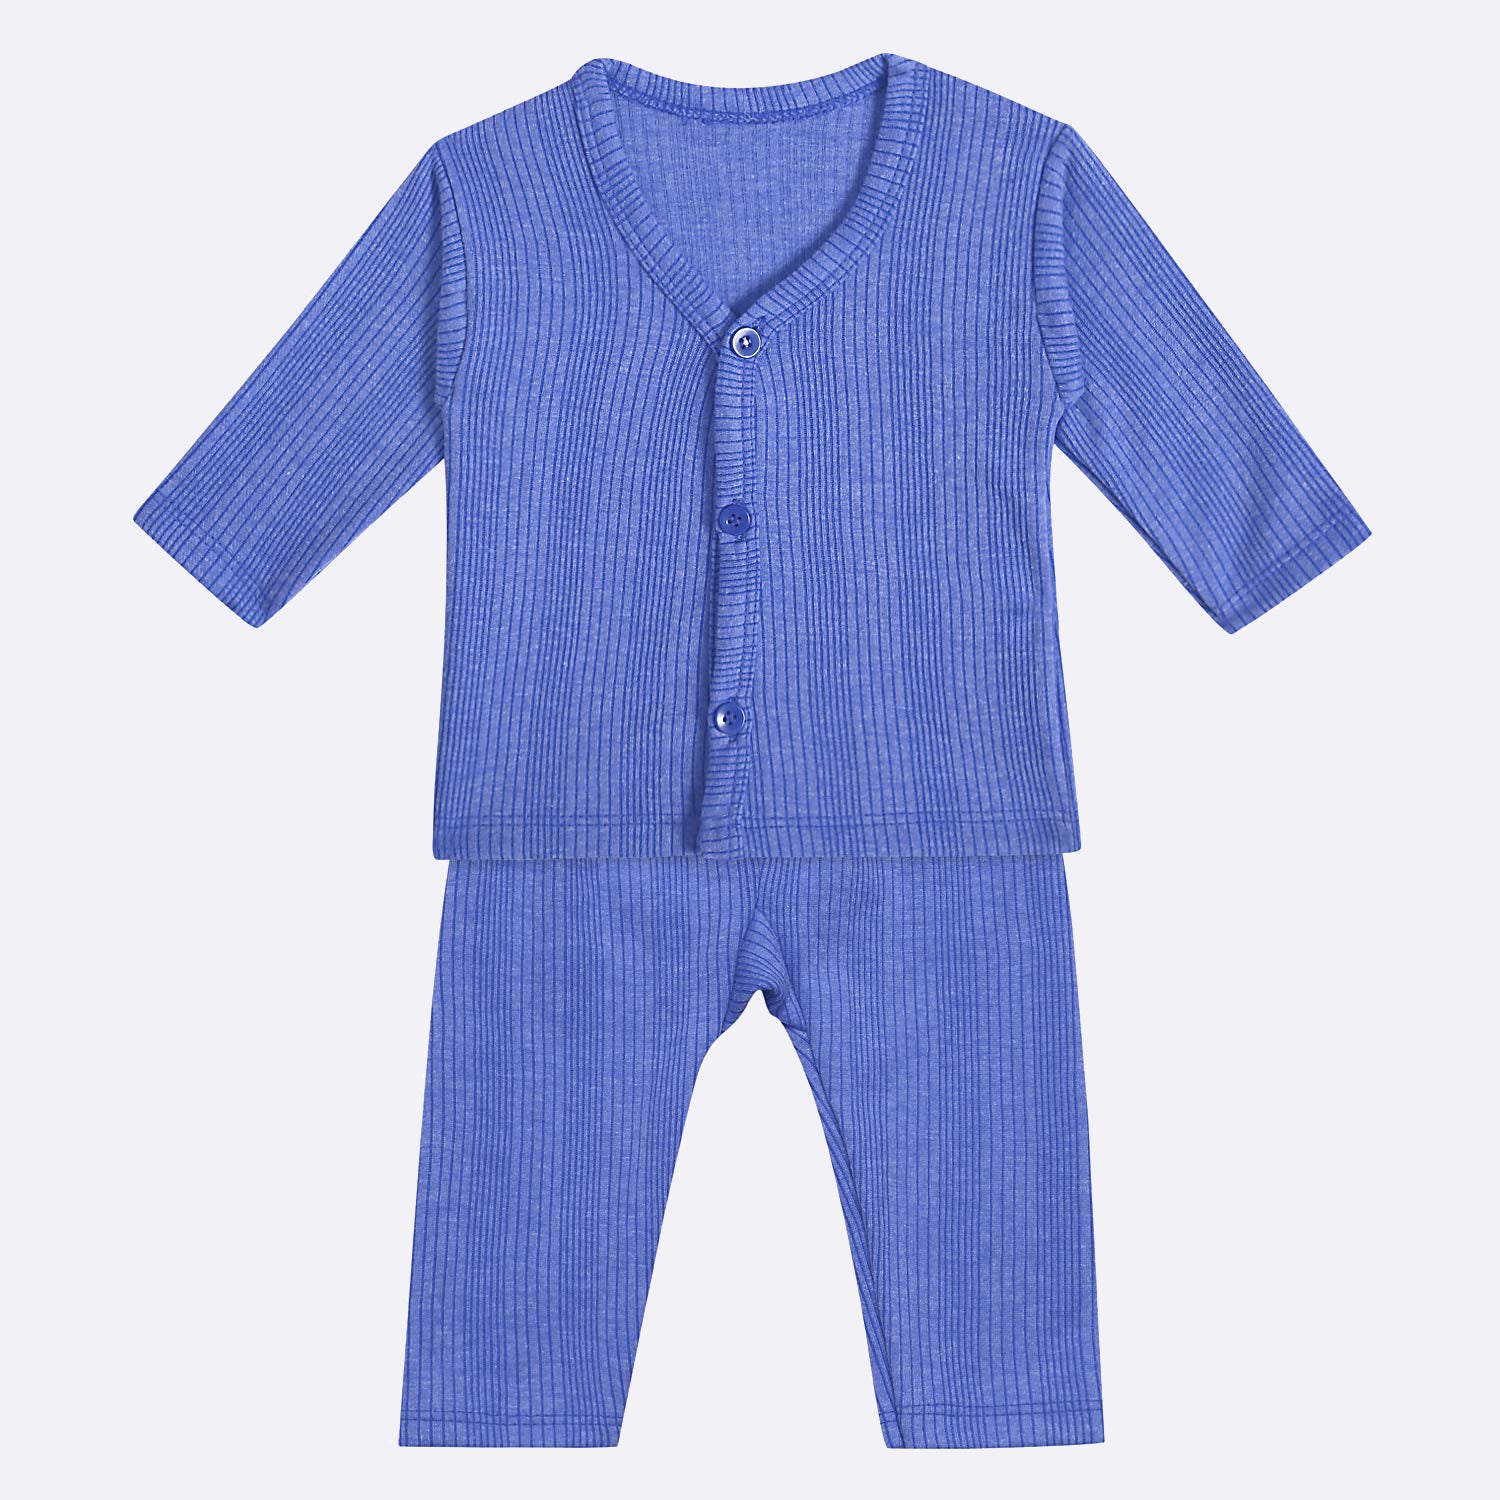 Super Comfy and Cozy Thermal Combo Set (Blue, Pack of 1)